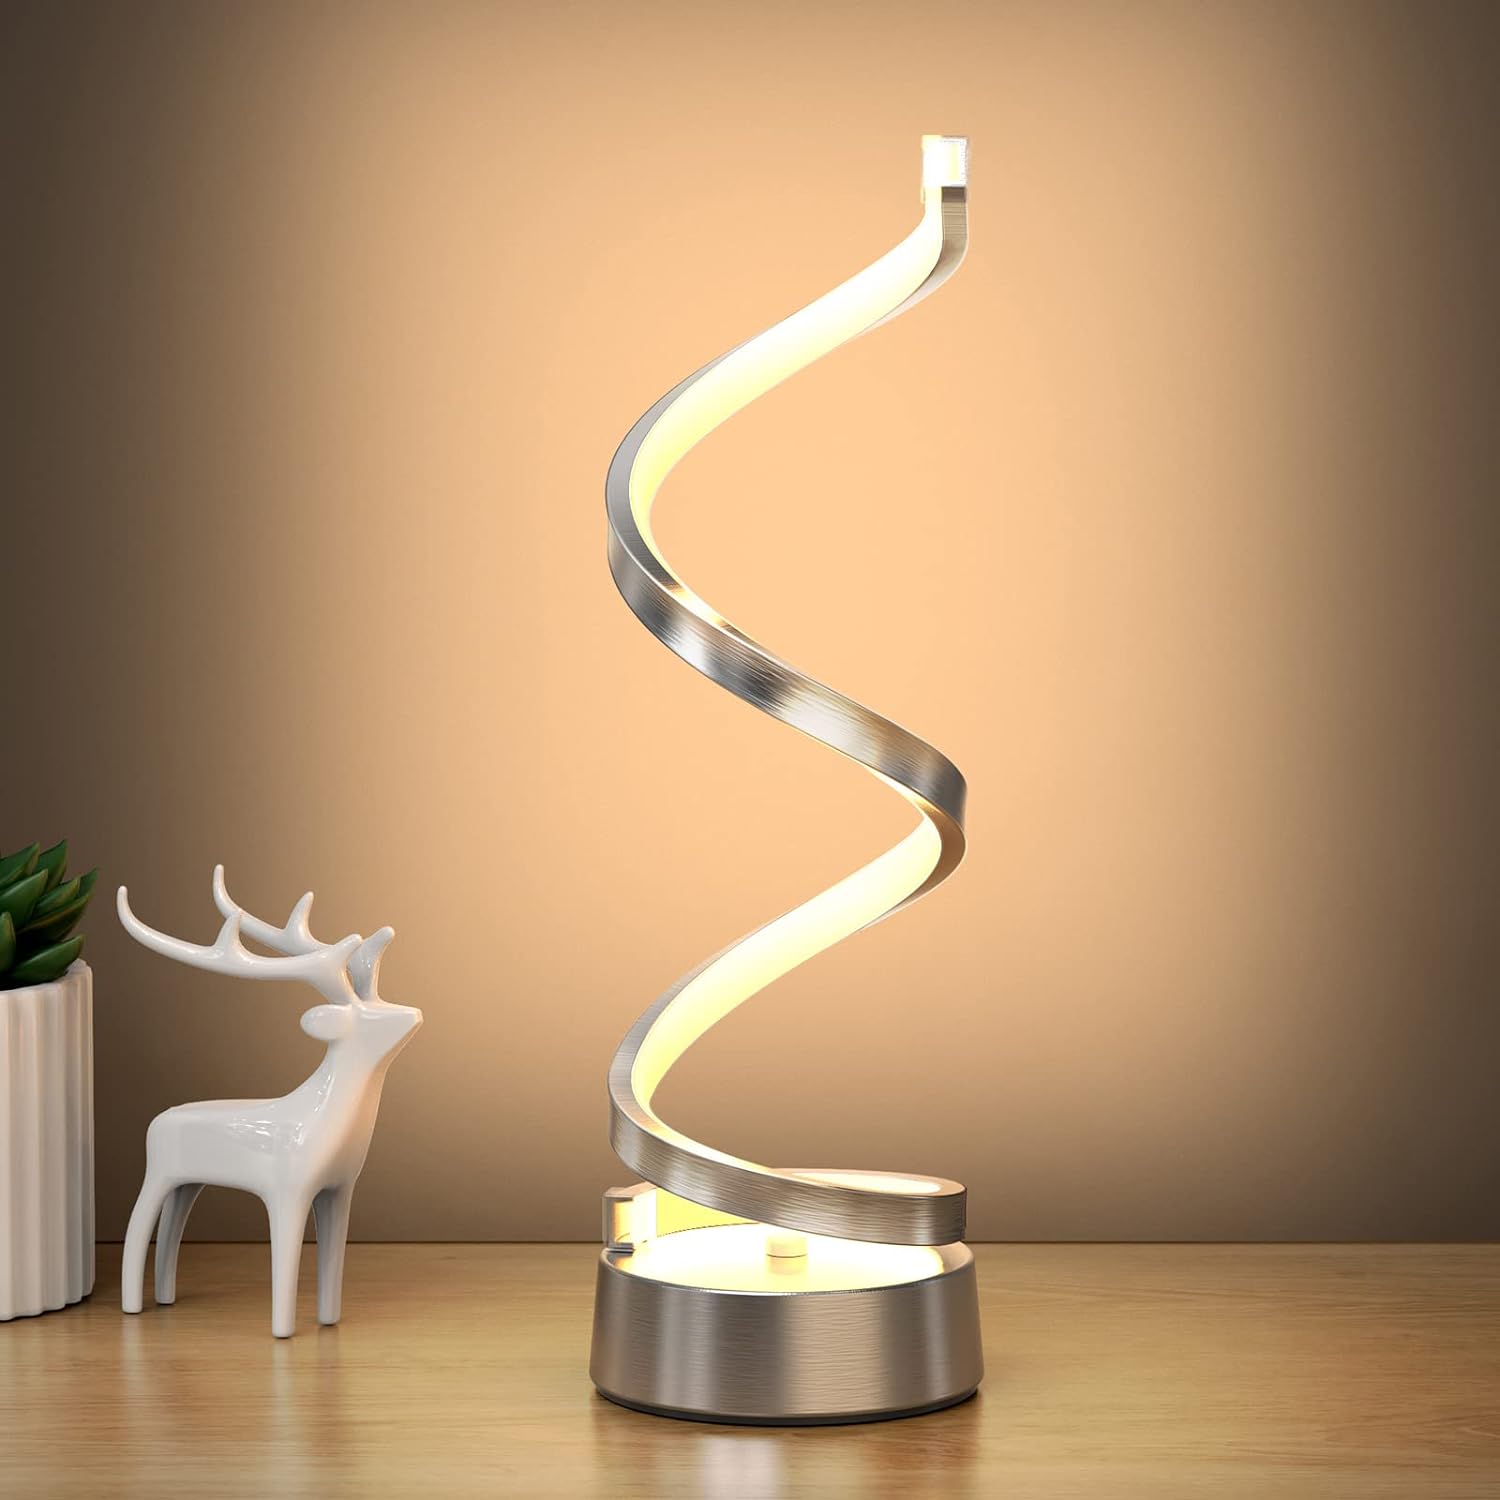 NUR Infinity Spiral LED Table Lamp, Dimmable Metallic Bedside Lamp with Touch Controller, 3 Colour Temperature, 15.8 Inch Height, Decorative Lamp for Home, Living Room & Office (Silver)